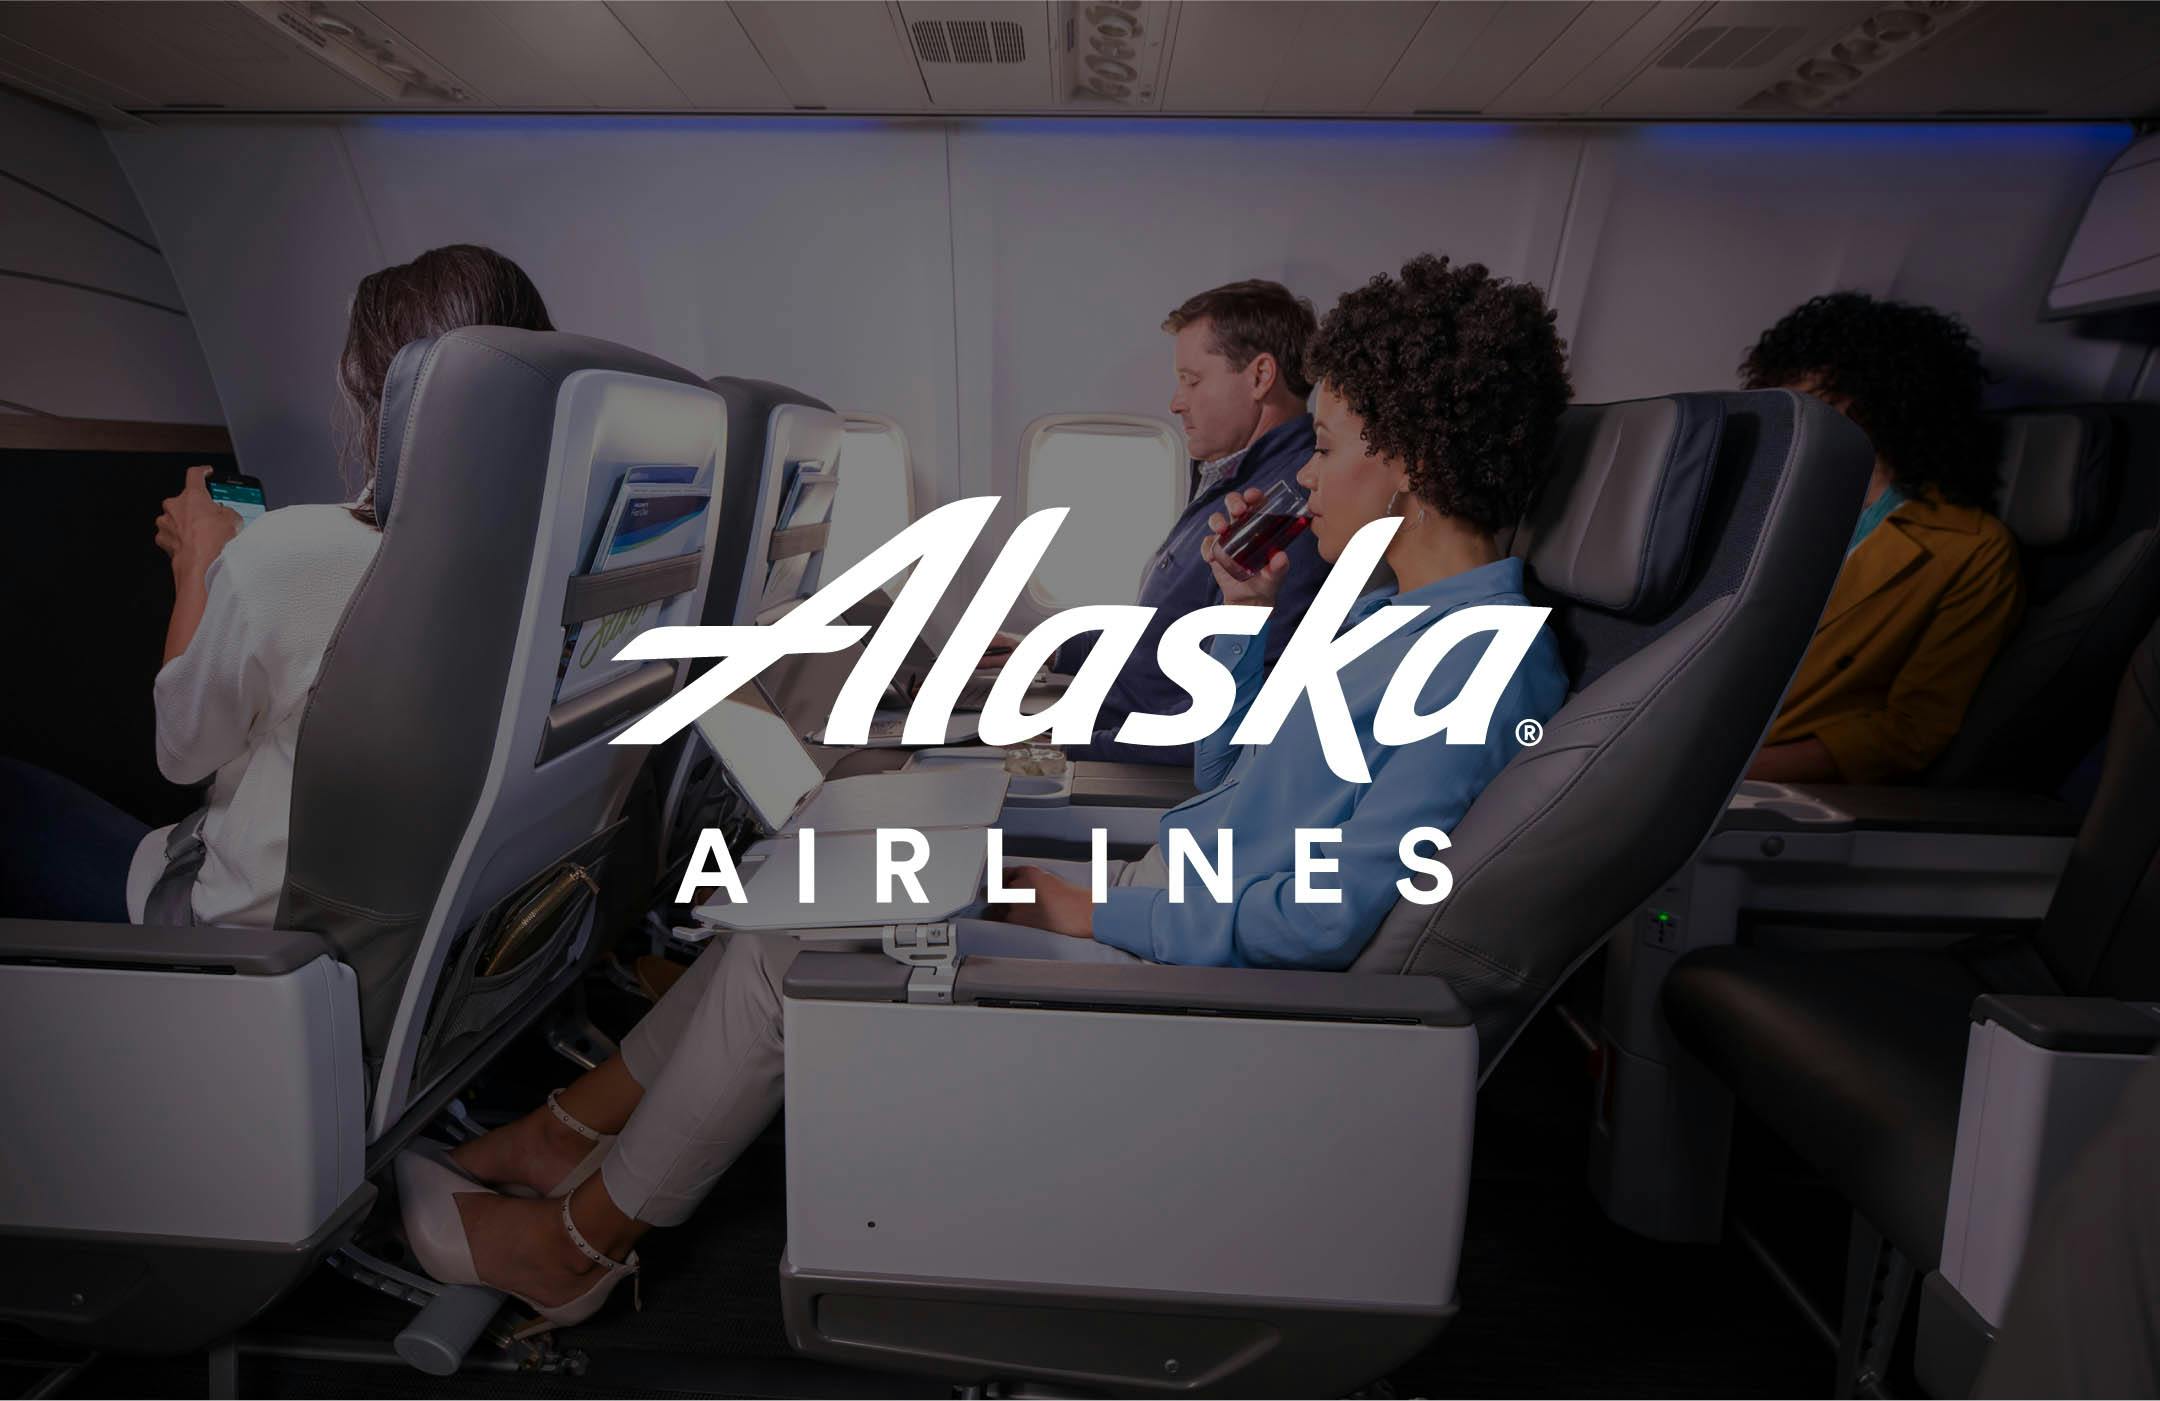 image of Alaska Airlines logo overlaid on a photograph of their first class cabin with people